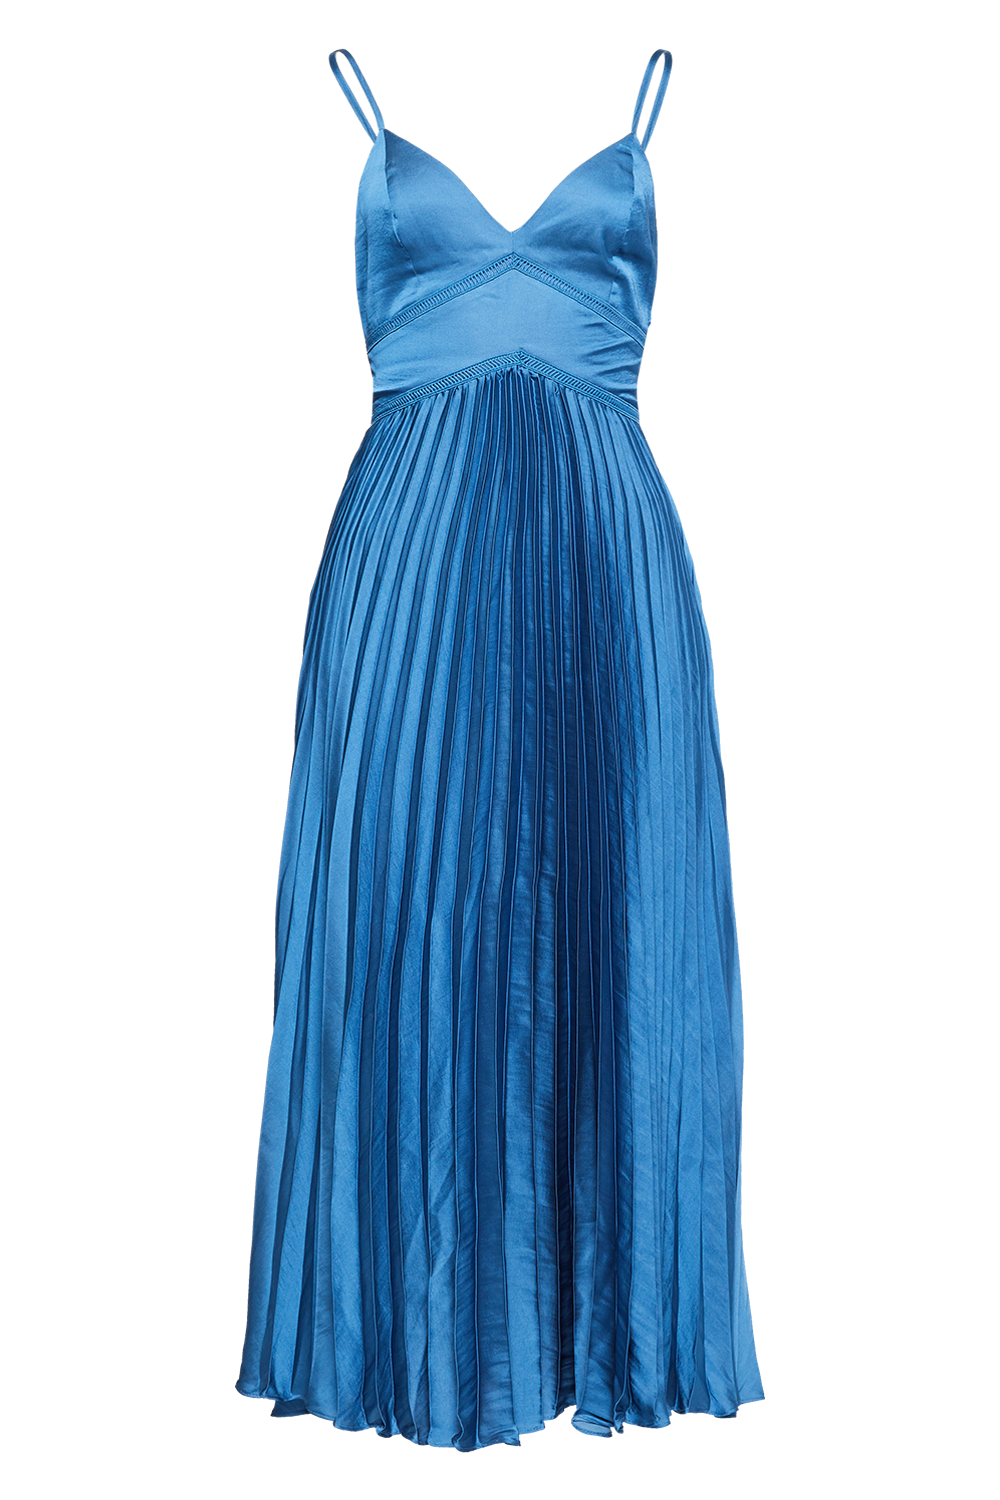 MARY PLEATED DRESS in colour BAYBERRY